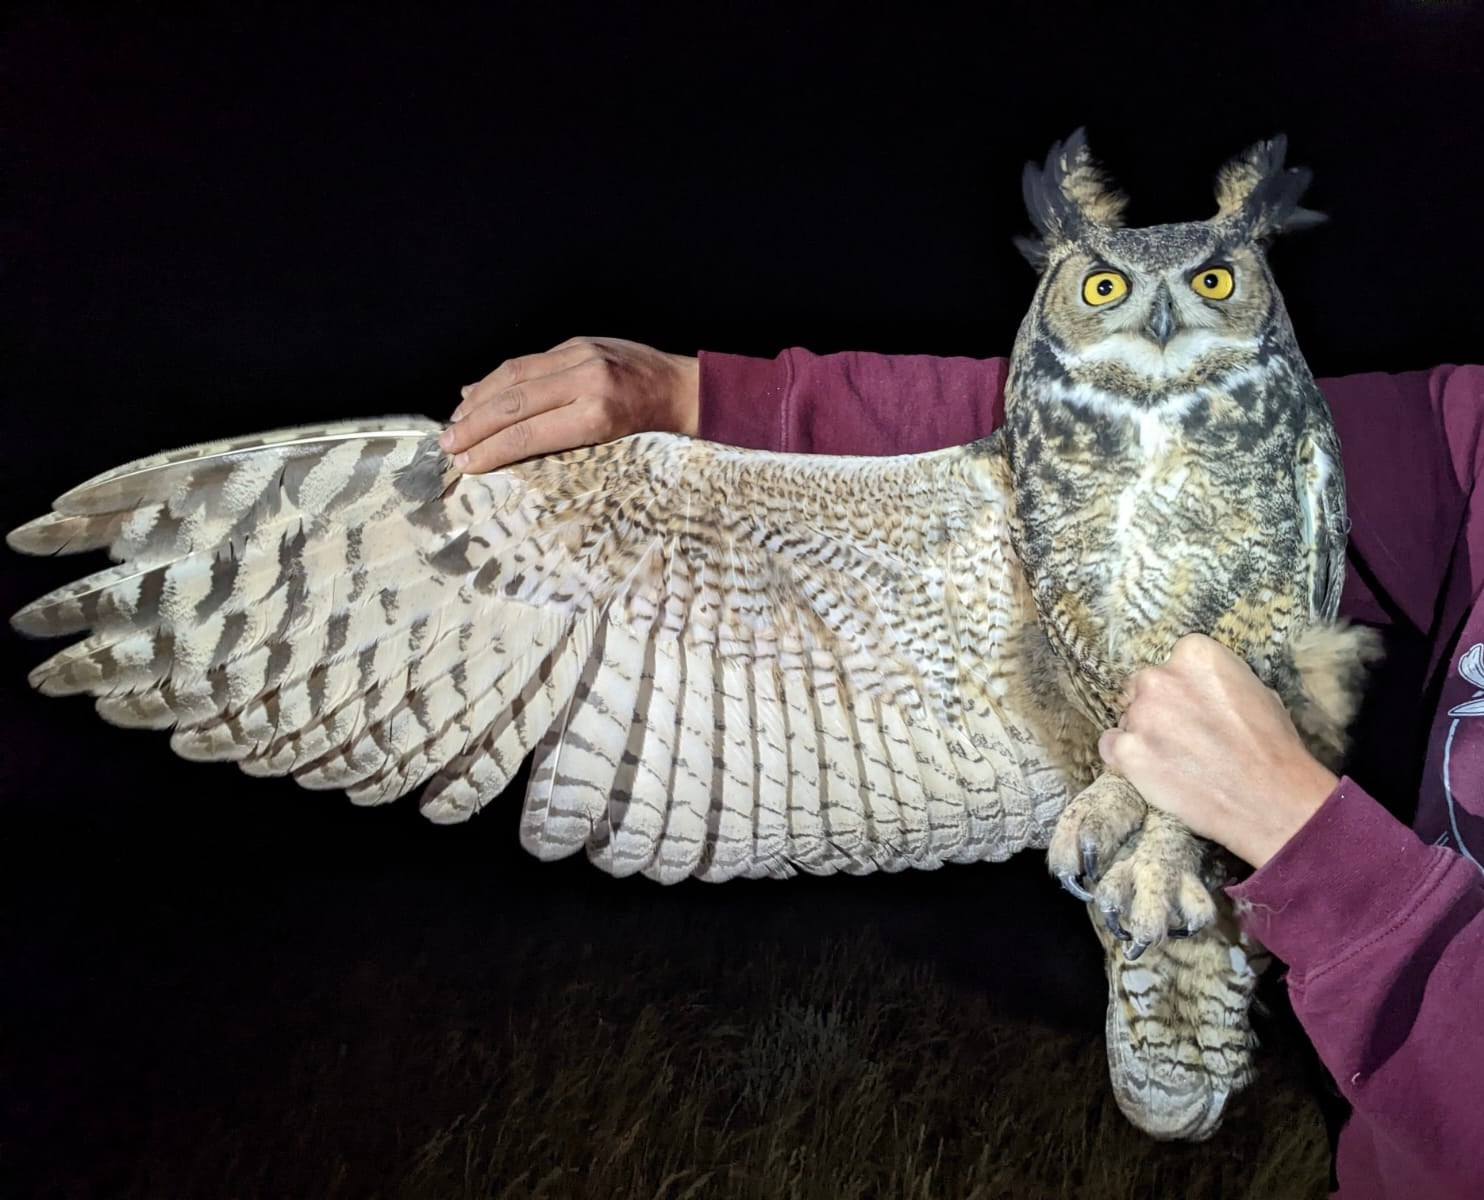 a biologists hands hold a large brown and white owl with yellow eyes in their left hand and gently extending it's wing open with their right